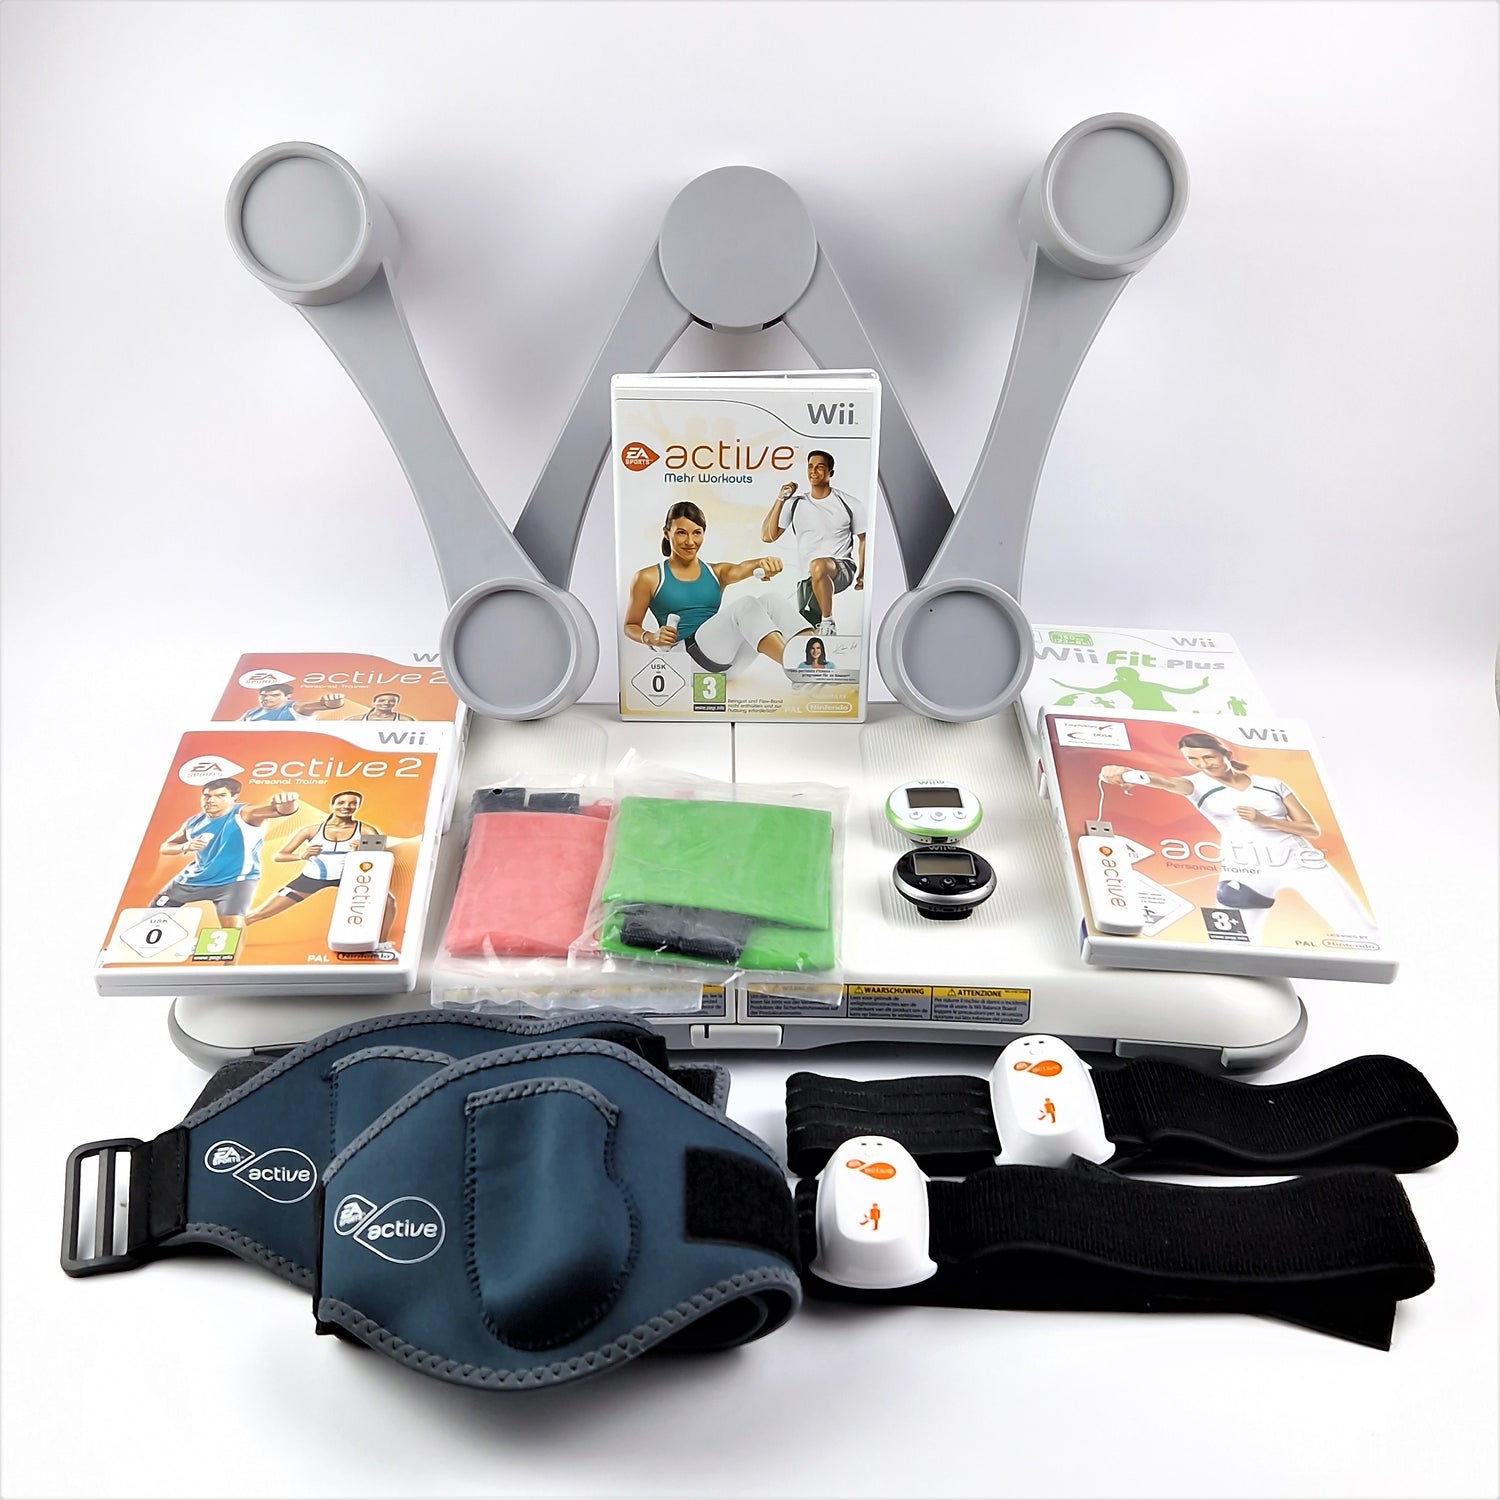 Nintendo Wii game: Wii Active Fitness bundle with many accessories